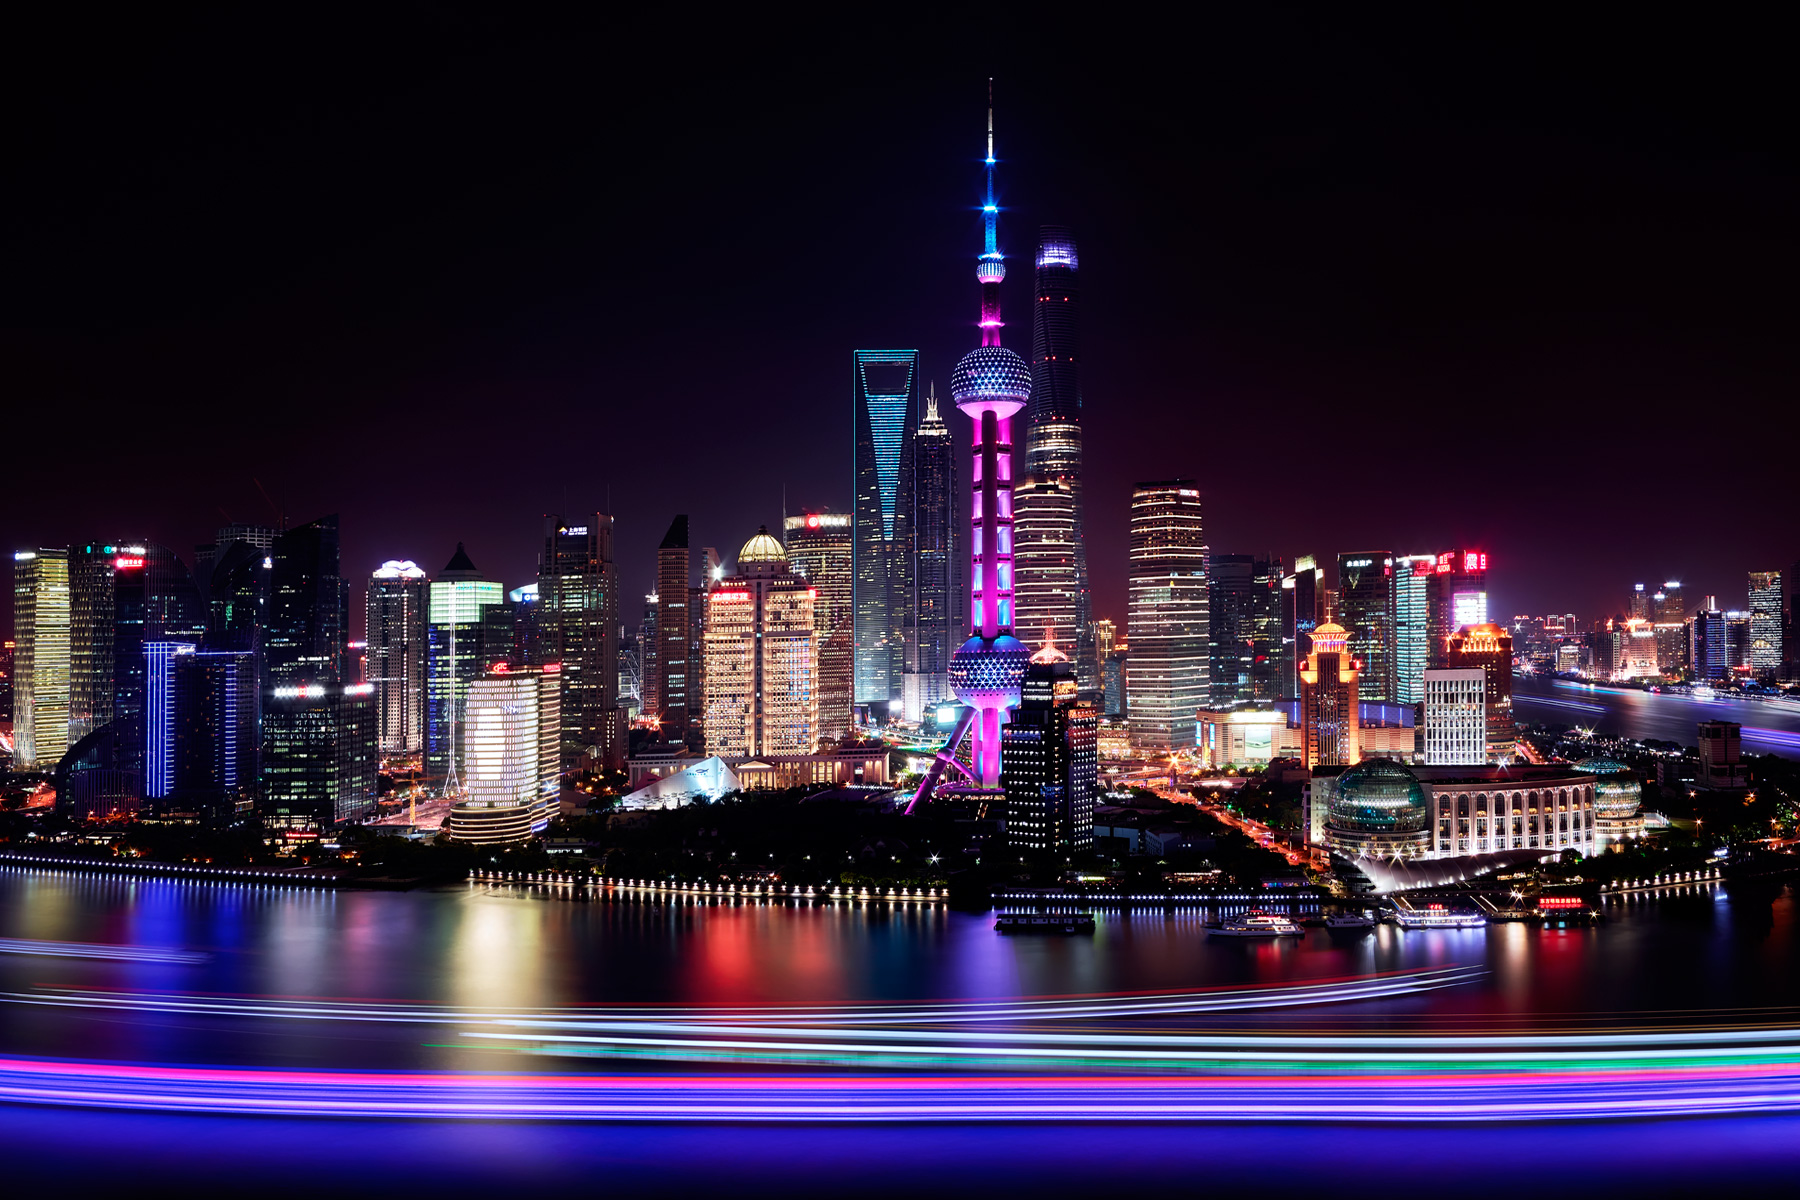 featured image bye bye shanghai china night cityscape pudong skyline tower oriental pearl jin mao swfc